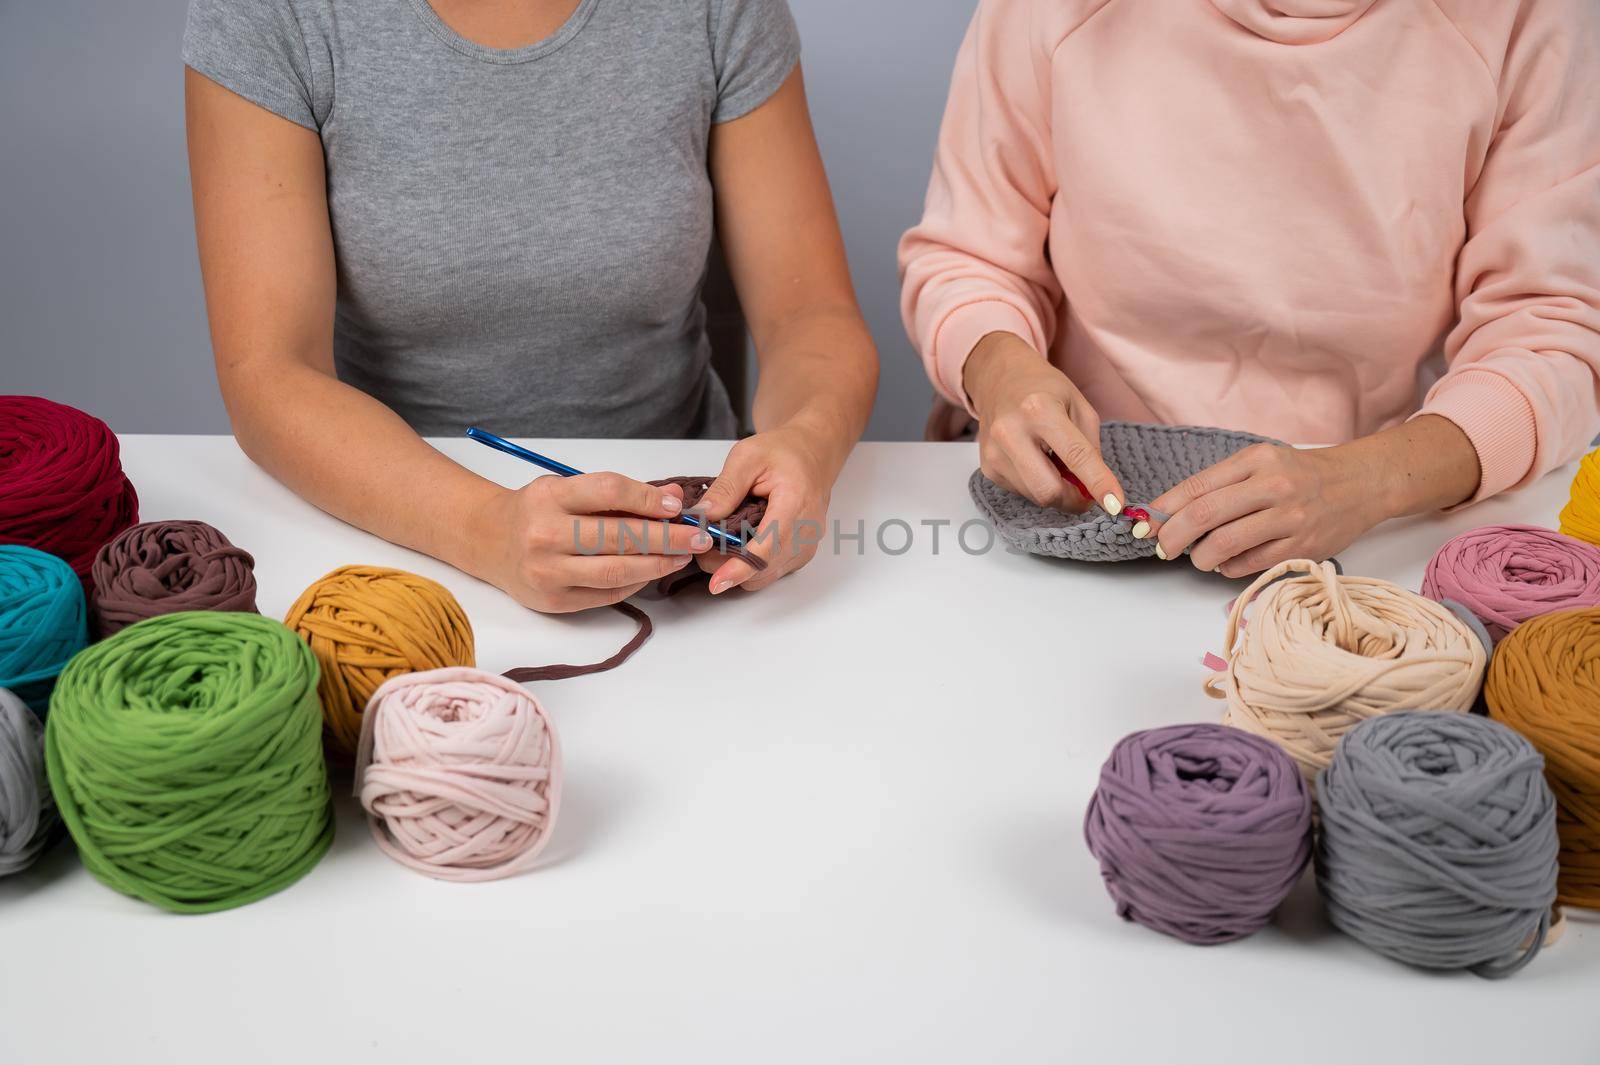 A woman teaches her friend needlework. Two women are crocheting a basket of cotton yarn